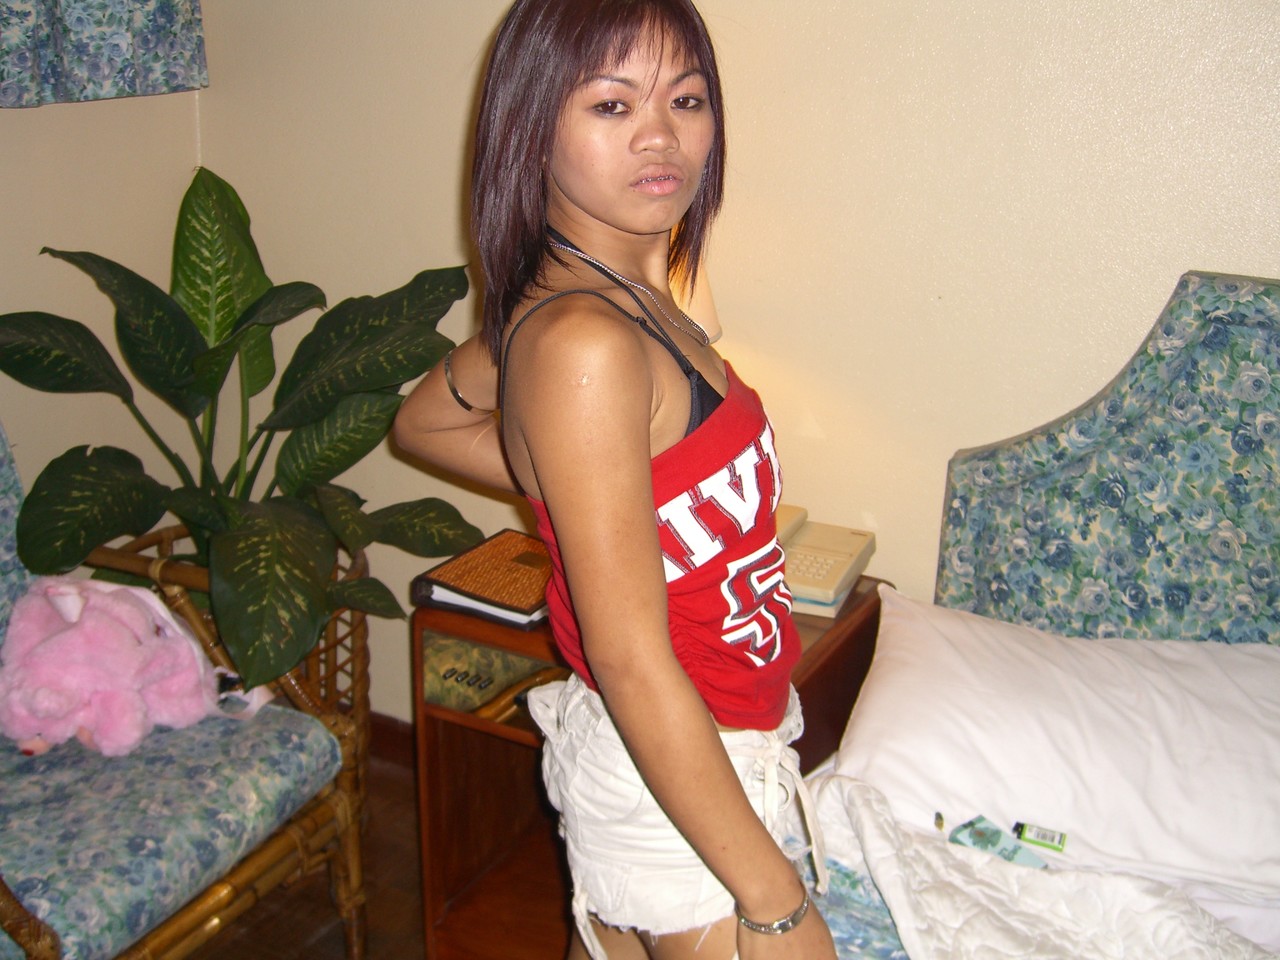 Filipina amateur licks her lips while getting totally naked on a bed ポルノ写真 #426918642